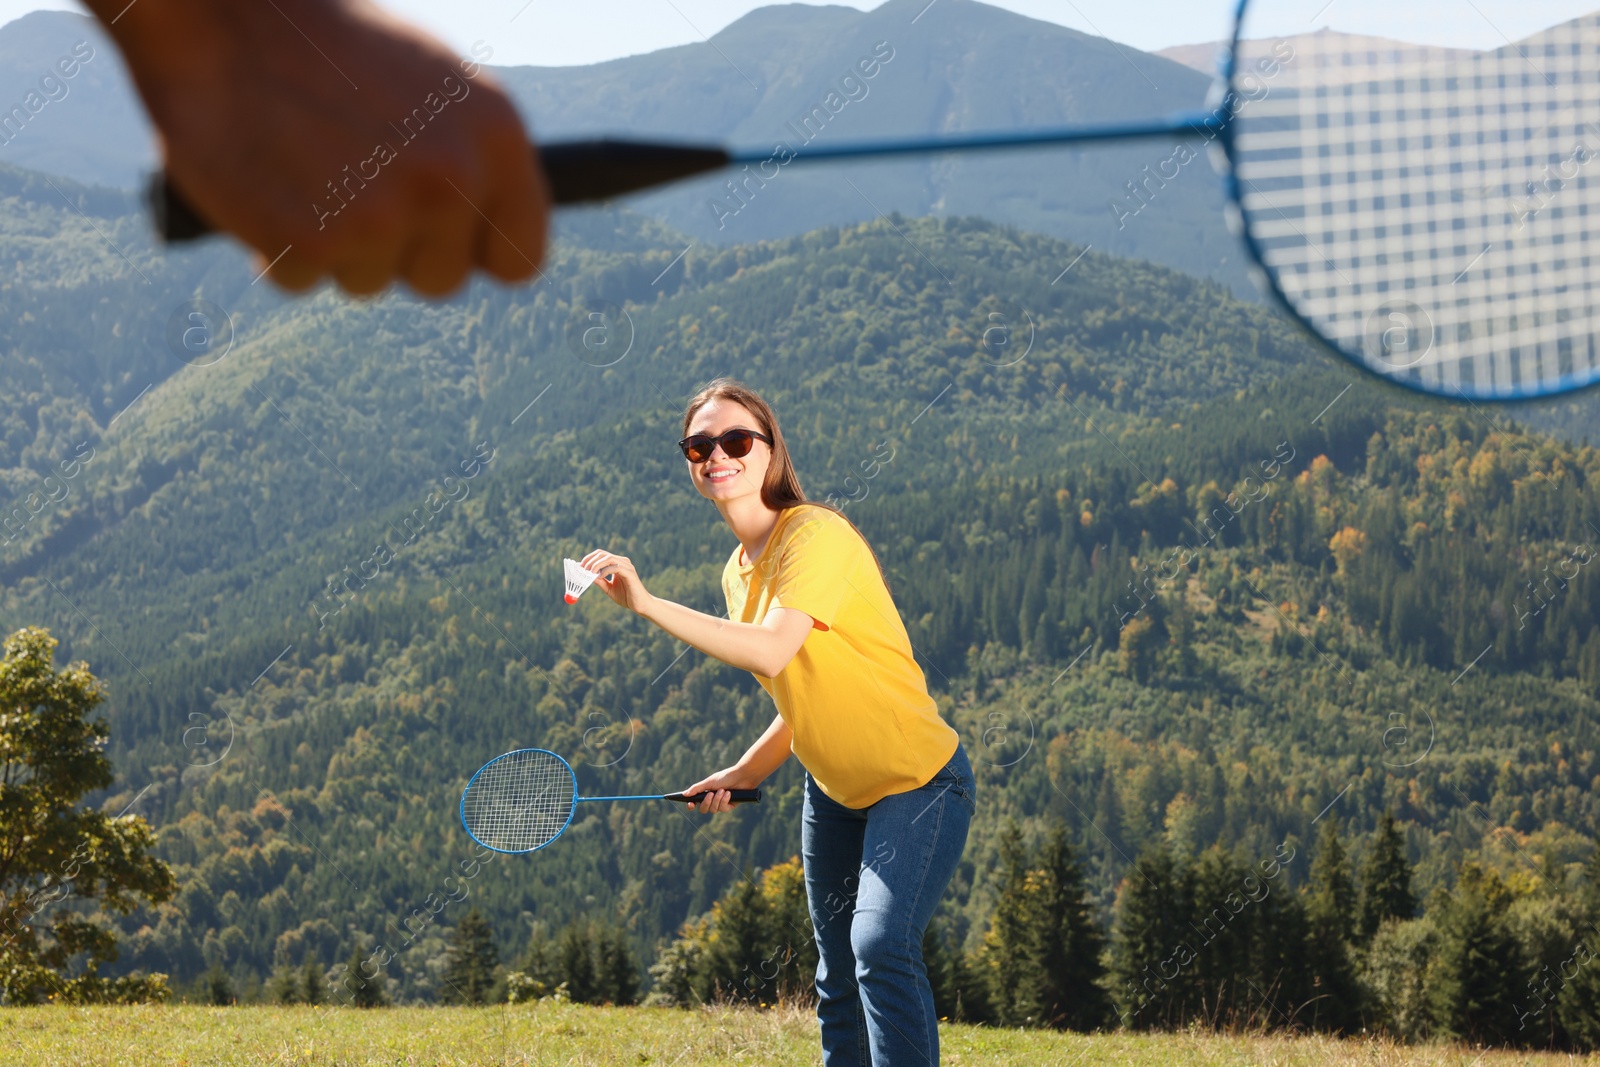 Photo of Woman playing badminton in mountains on sunny day